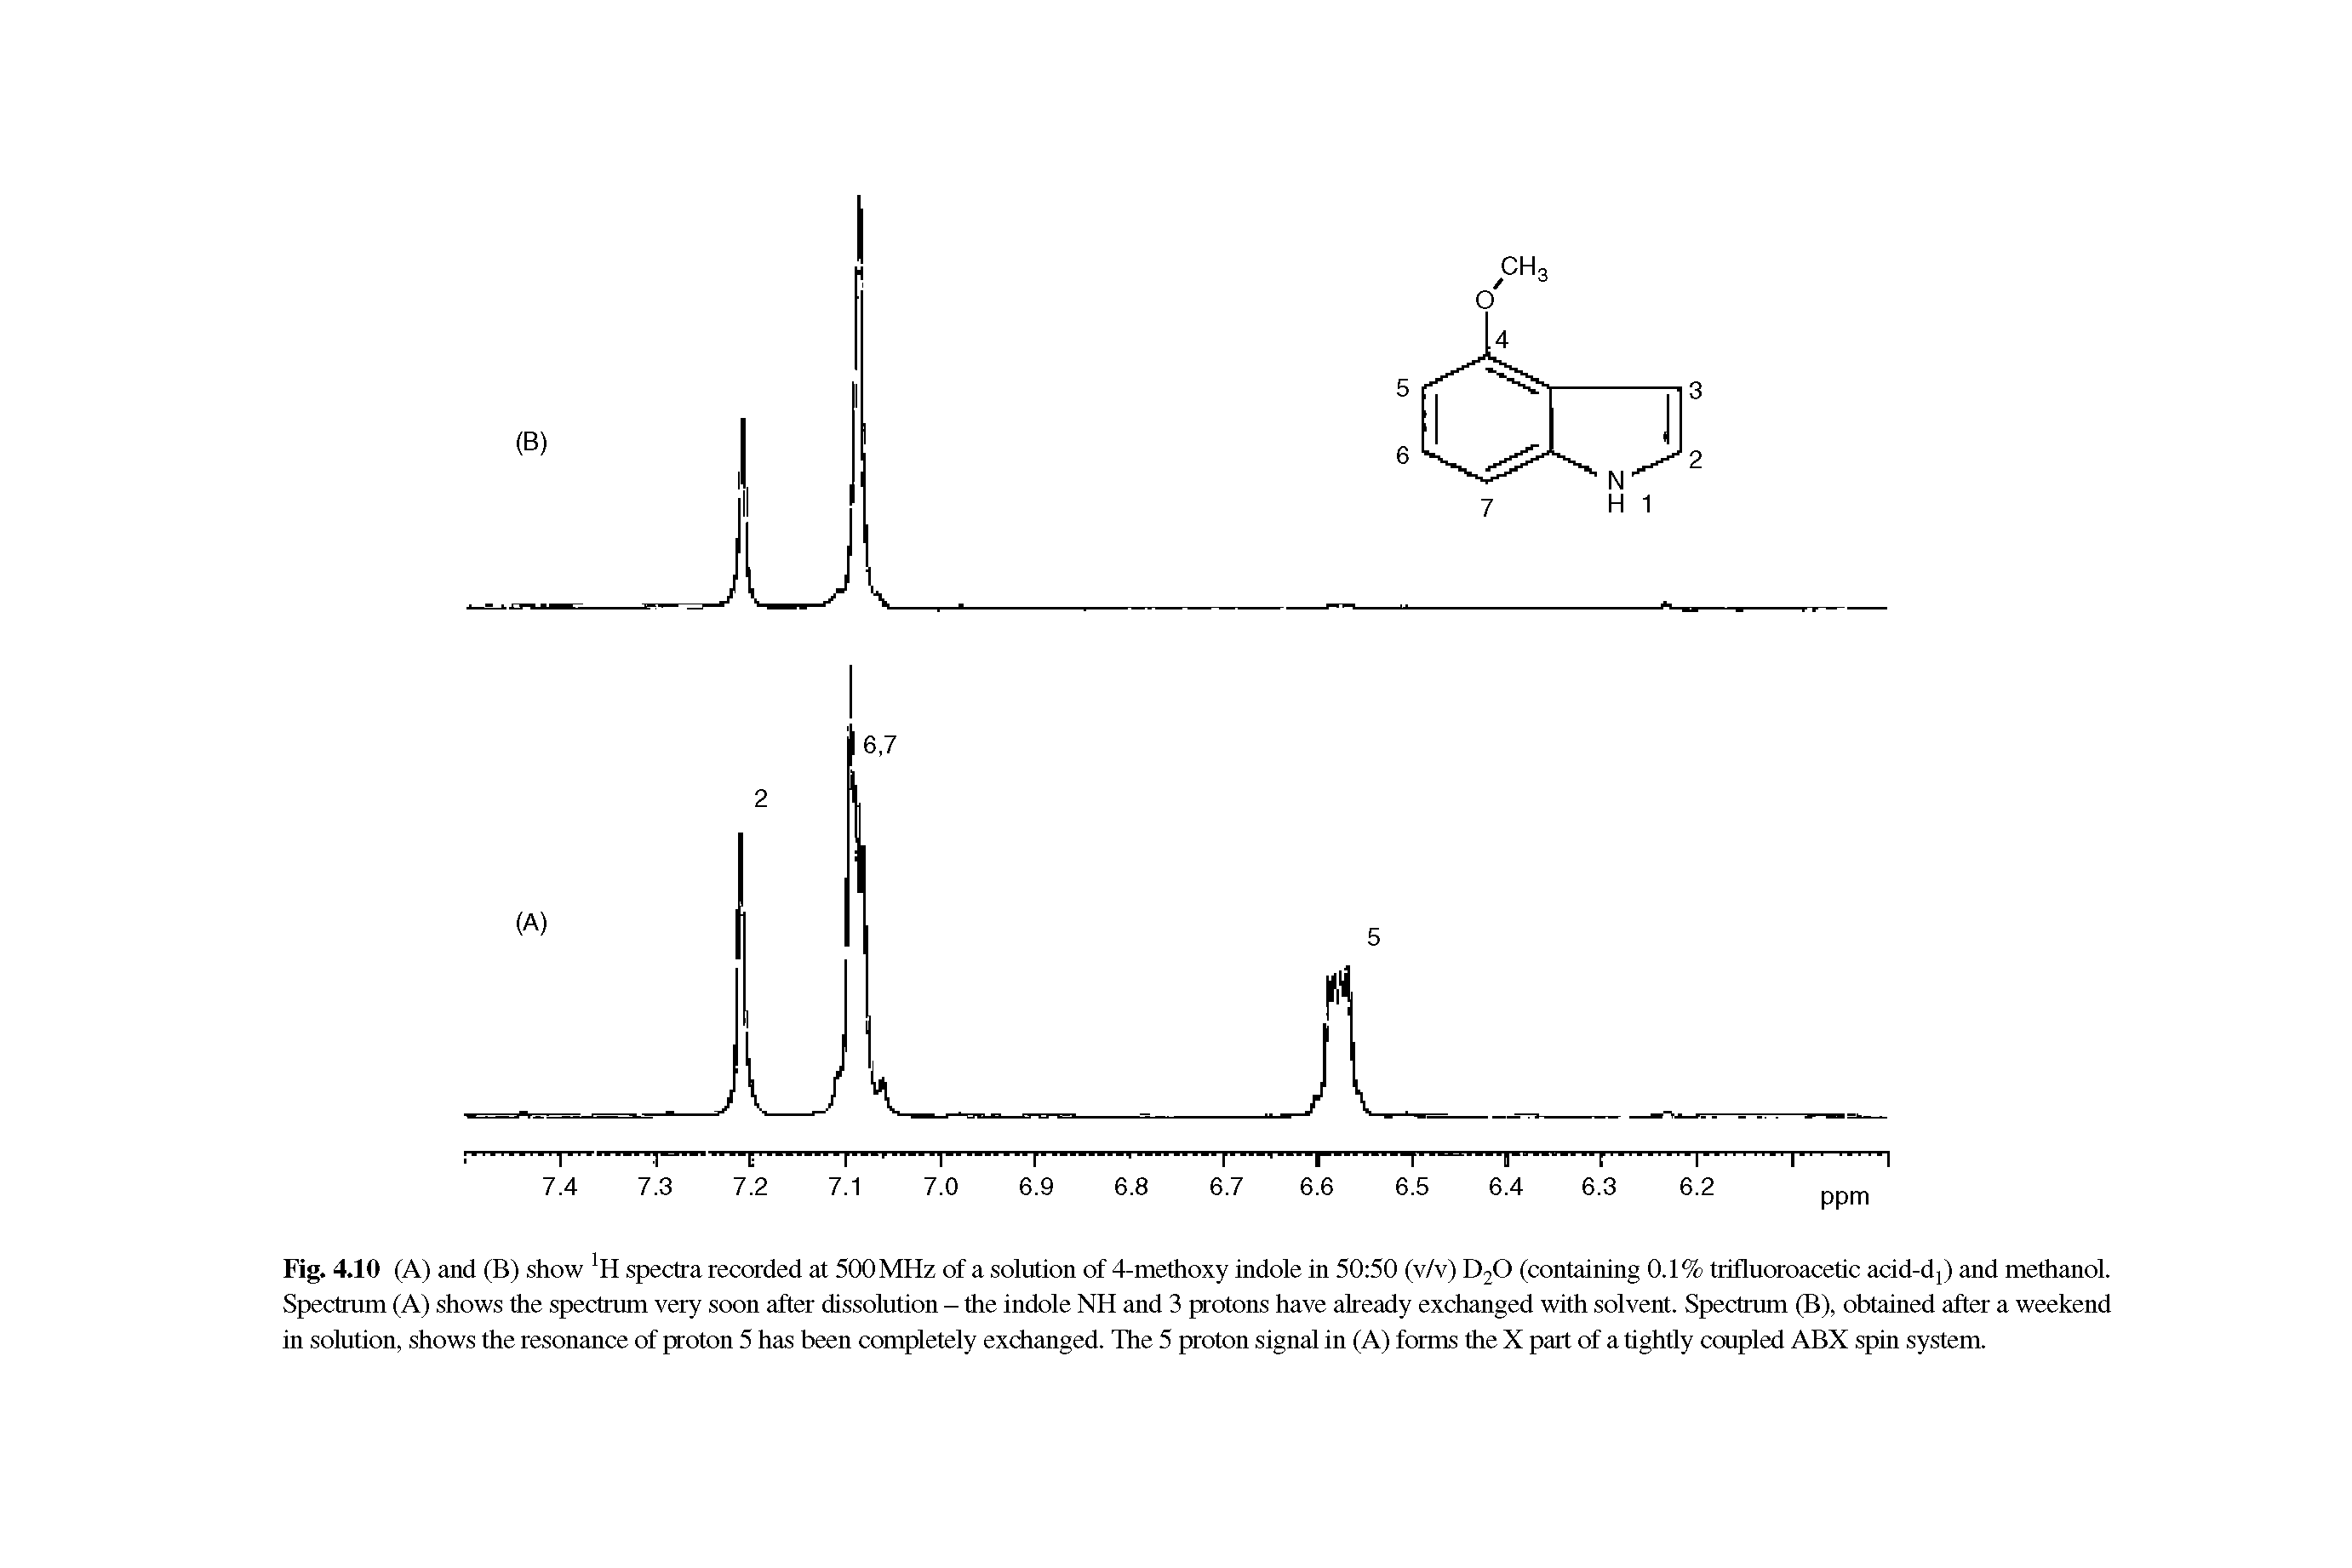 Fig. 4.10 (A) and (B) show H spectra recorded at 500 MHz of a solution of 4-methoxy indole in 50 50 (v/v) D2O (containing 0.1% trifluoroacetic acid-dj) and methanol. Spectrum (A) shows the spectrum very soon after dissolution - the indole NH and 3 protons have already exchanged with solvent. Spectrum (B), obtained after a weekend in solution, shows the resonance of proton 5 has been completely exchanged. The 5 proton signal in (A) forms the X part of a tightly coupled ABX spin system.